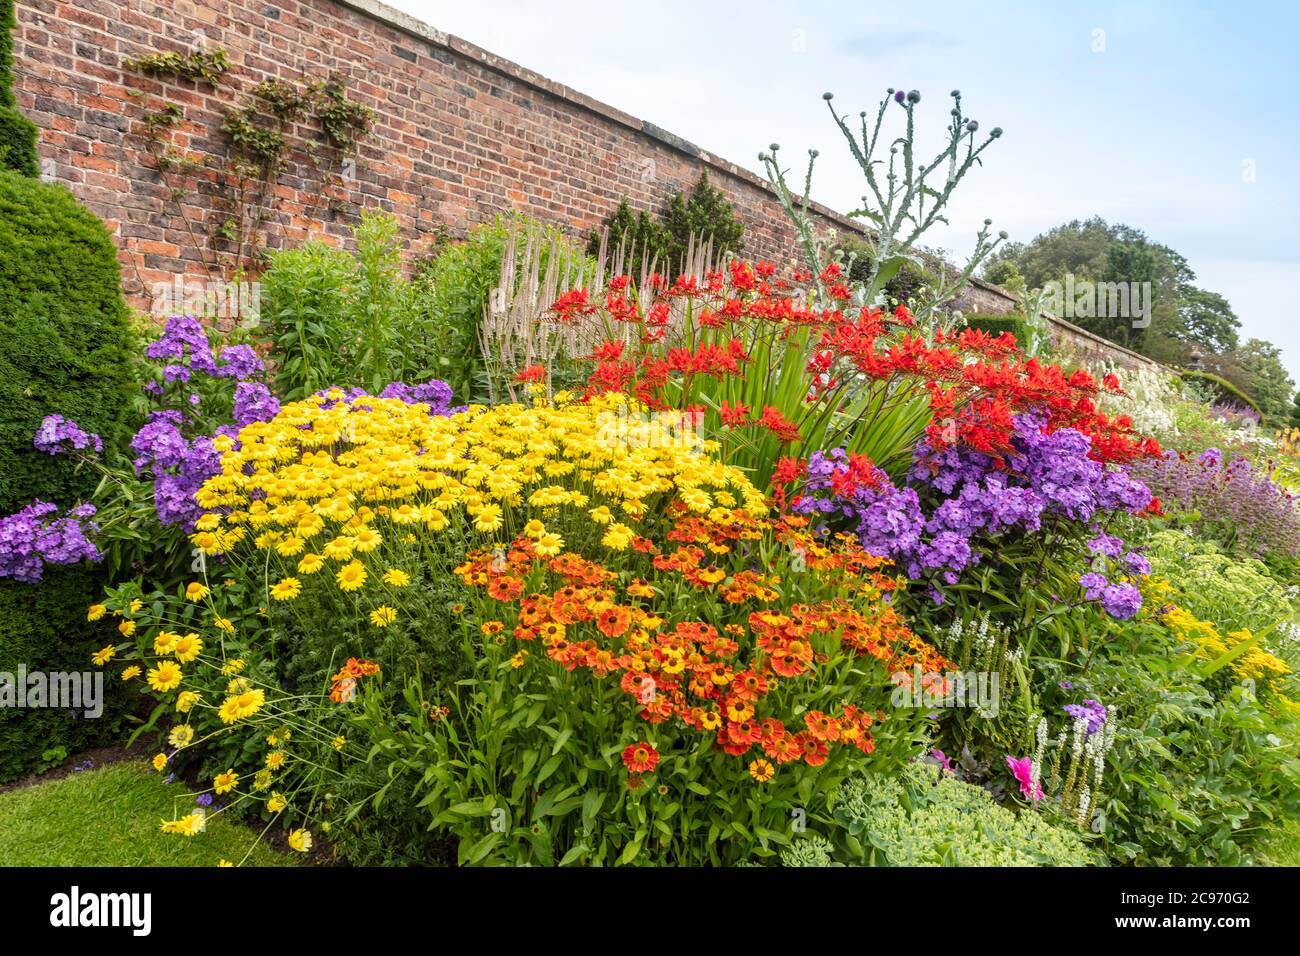 Herbaceous border with yellow, red and purple flowers in an established garden. Stock Photo